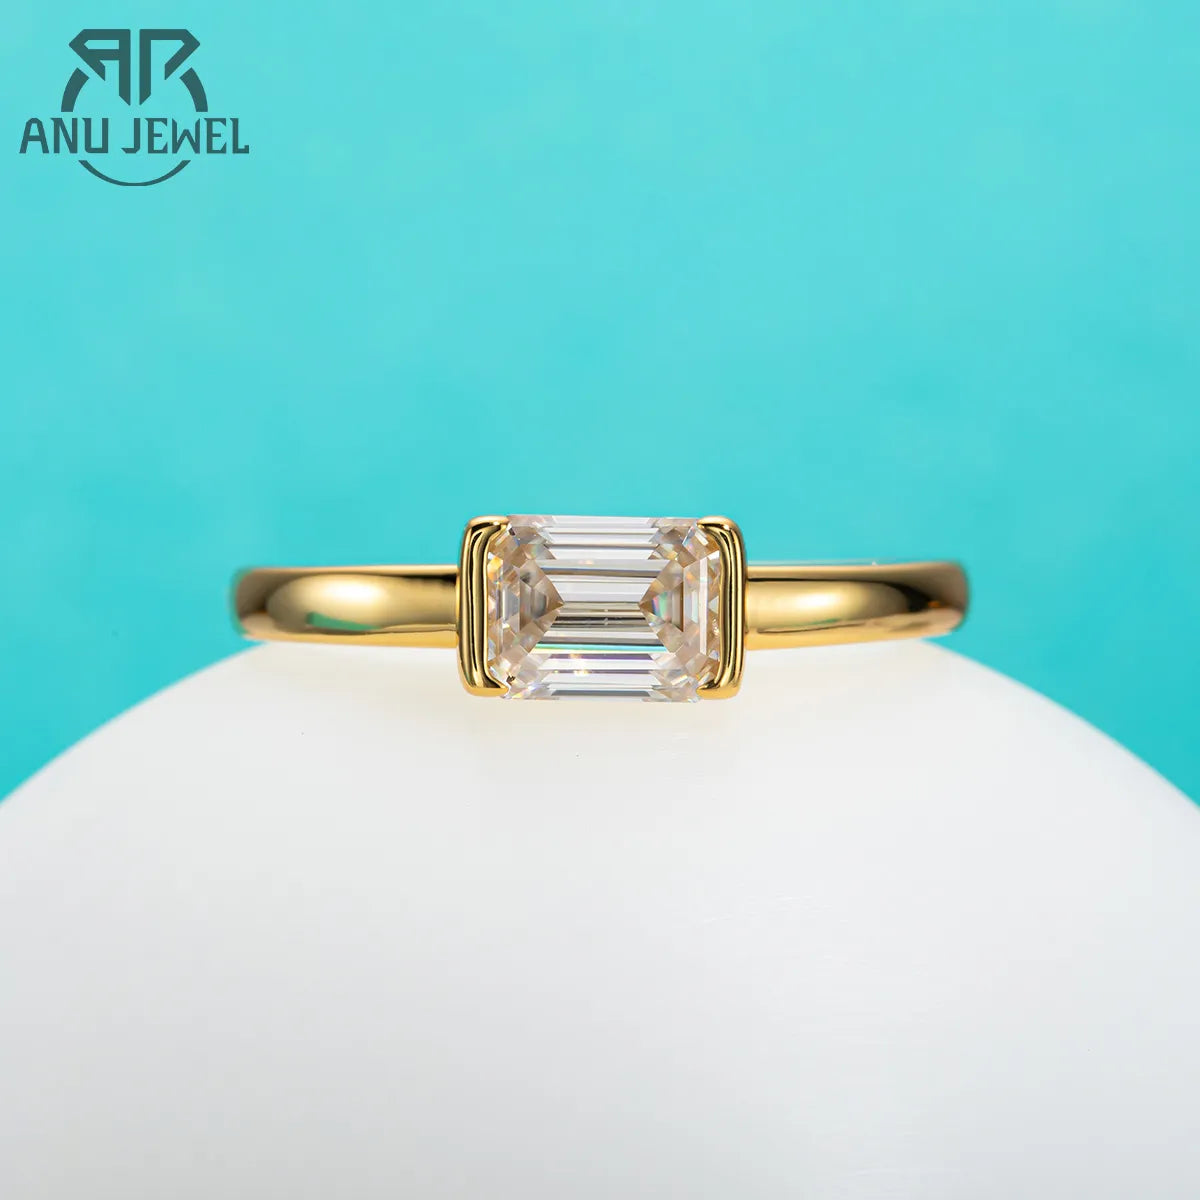 Moissanite silver ring, Emerald Cut setting with Gold accents, diamond accents.